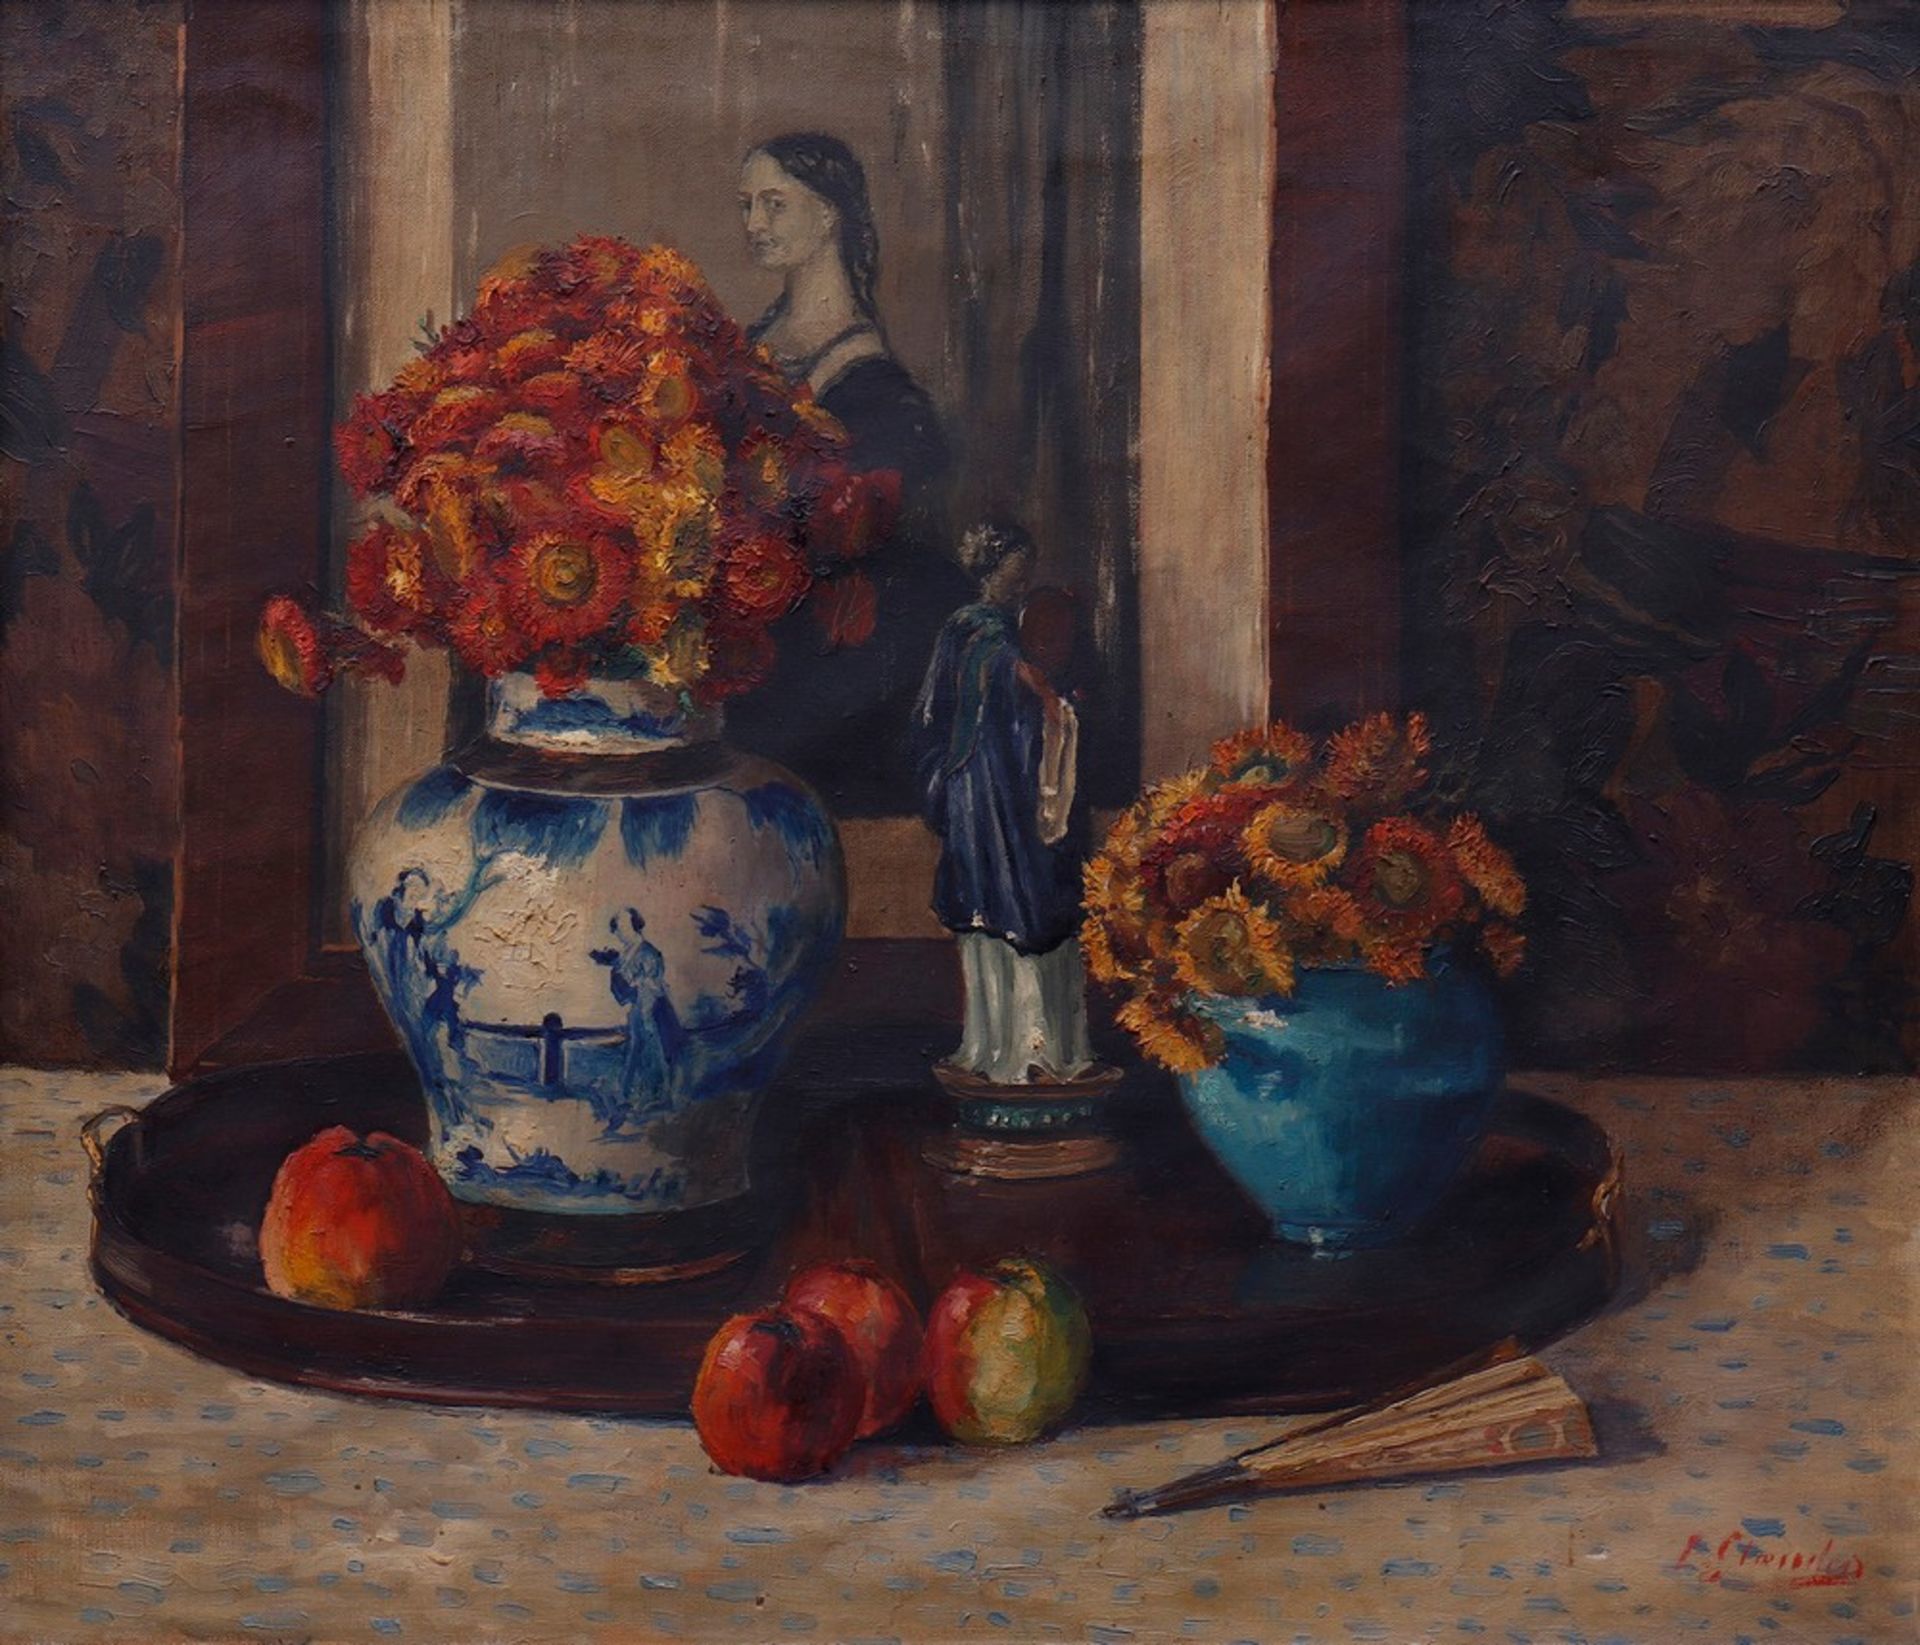 Still life with paintings, flowers and sculpture, around 1900/1920 - Image 2 of 4